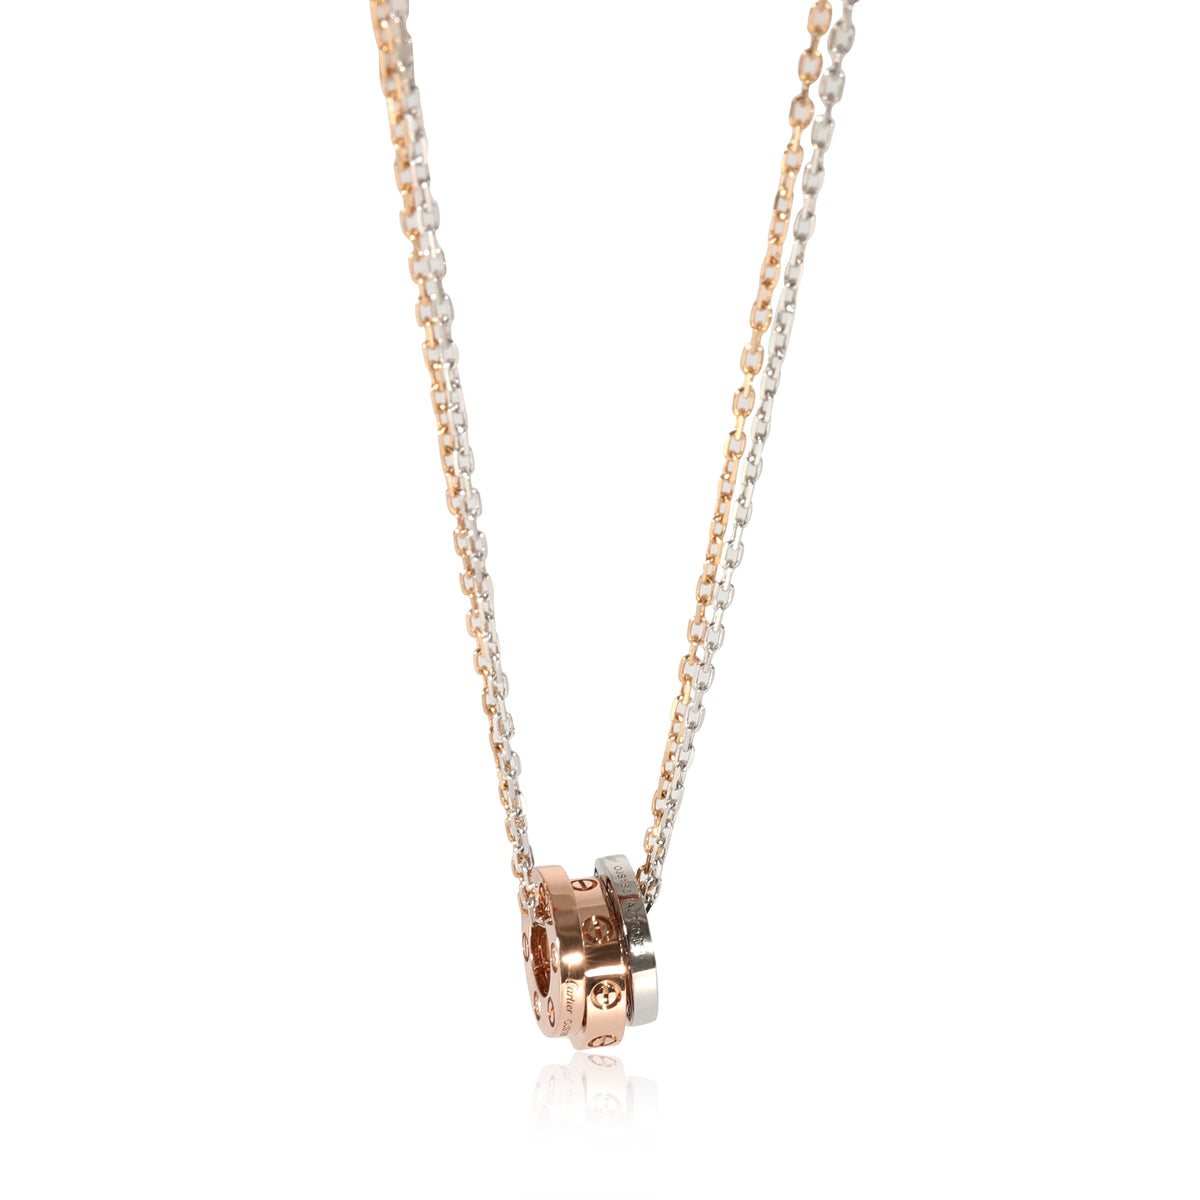 Cartier Love Necklace in 18k 3 Tone Gold 0.01 CTW